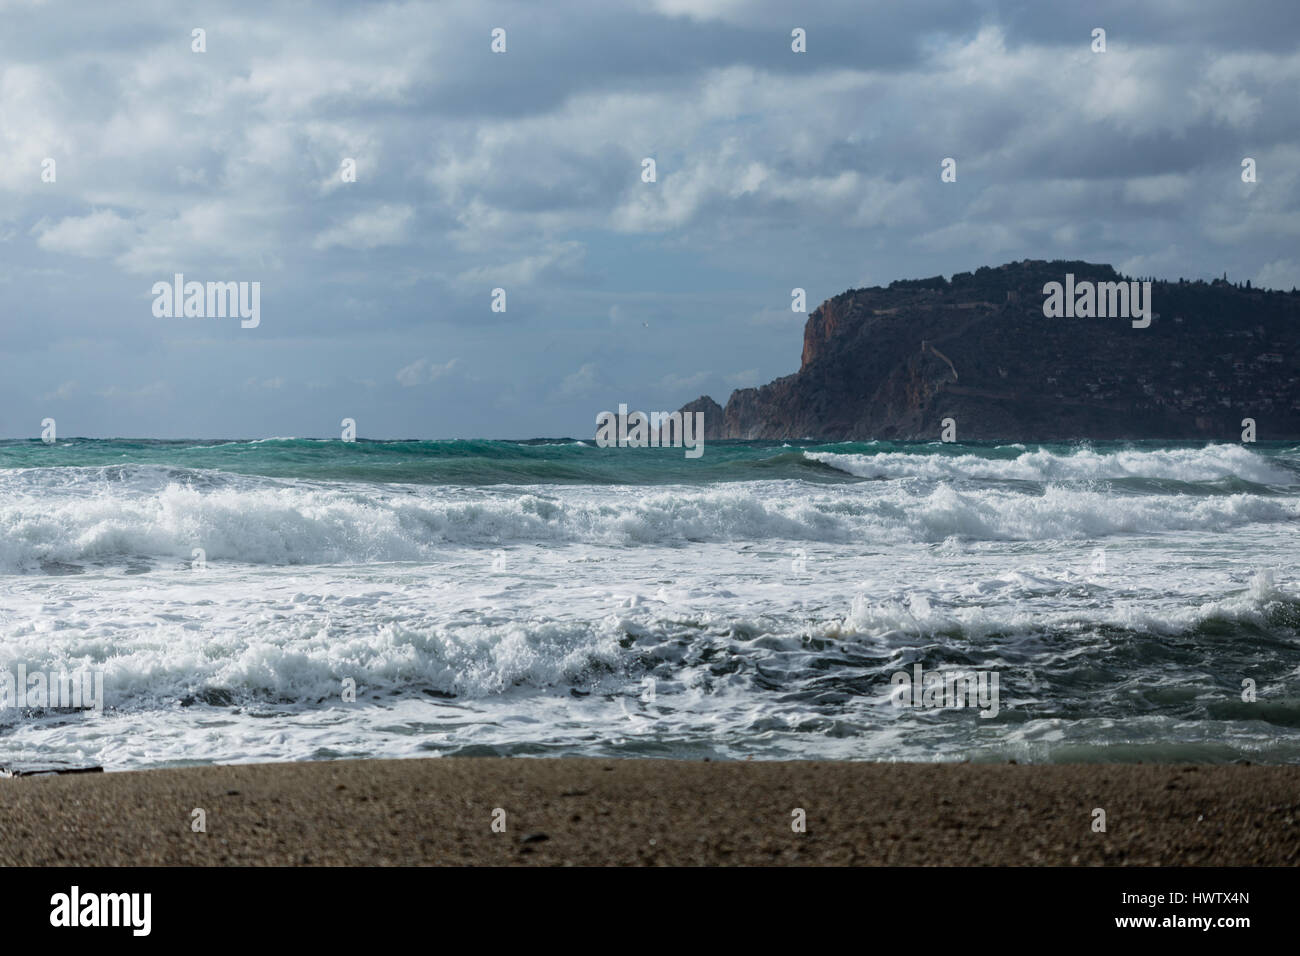 Seascape showing powerful waves heating coast of Alanya shot on cloudy day landscape layout Stock Photo